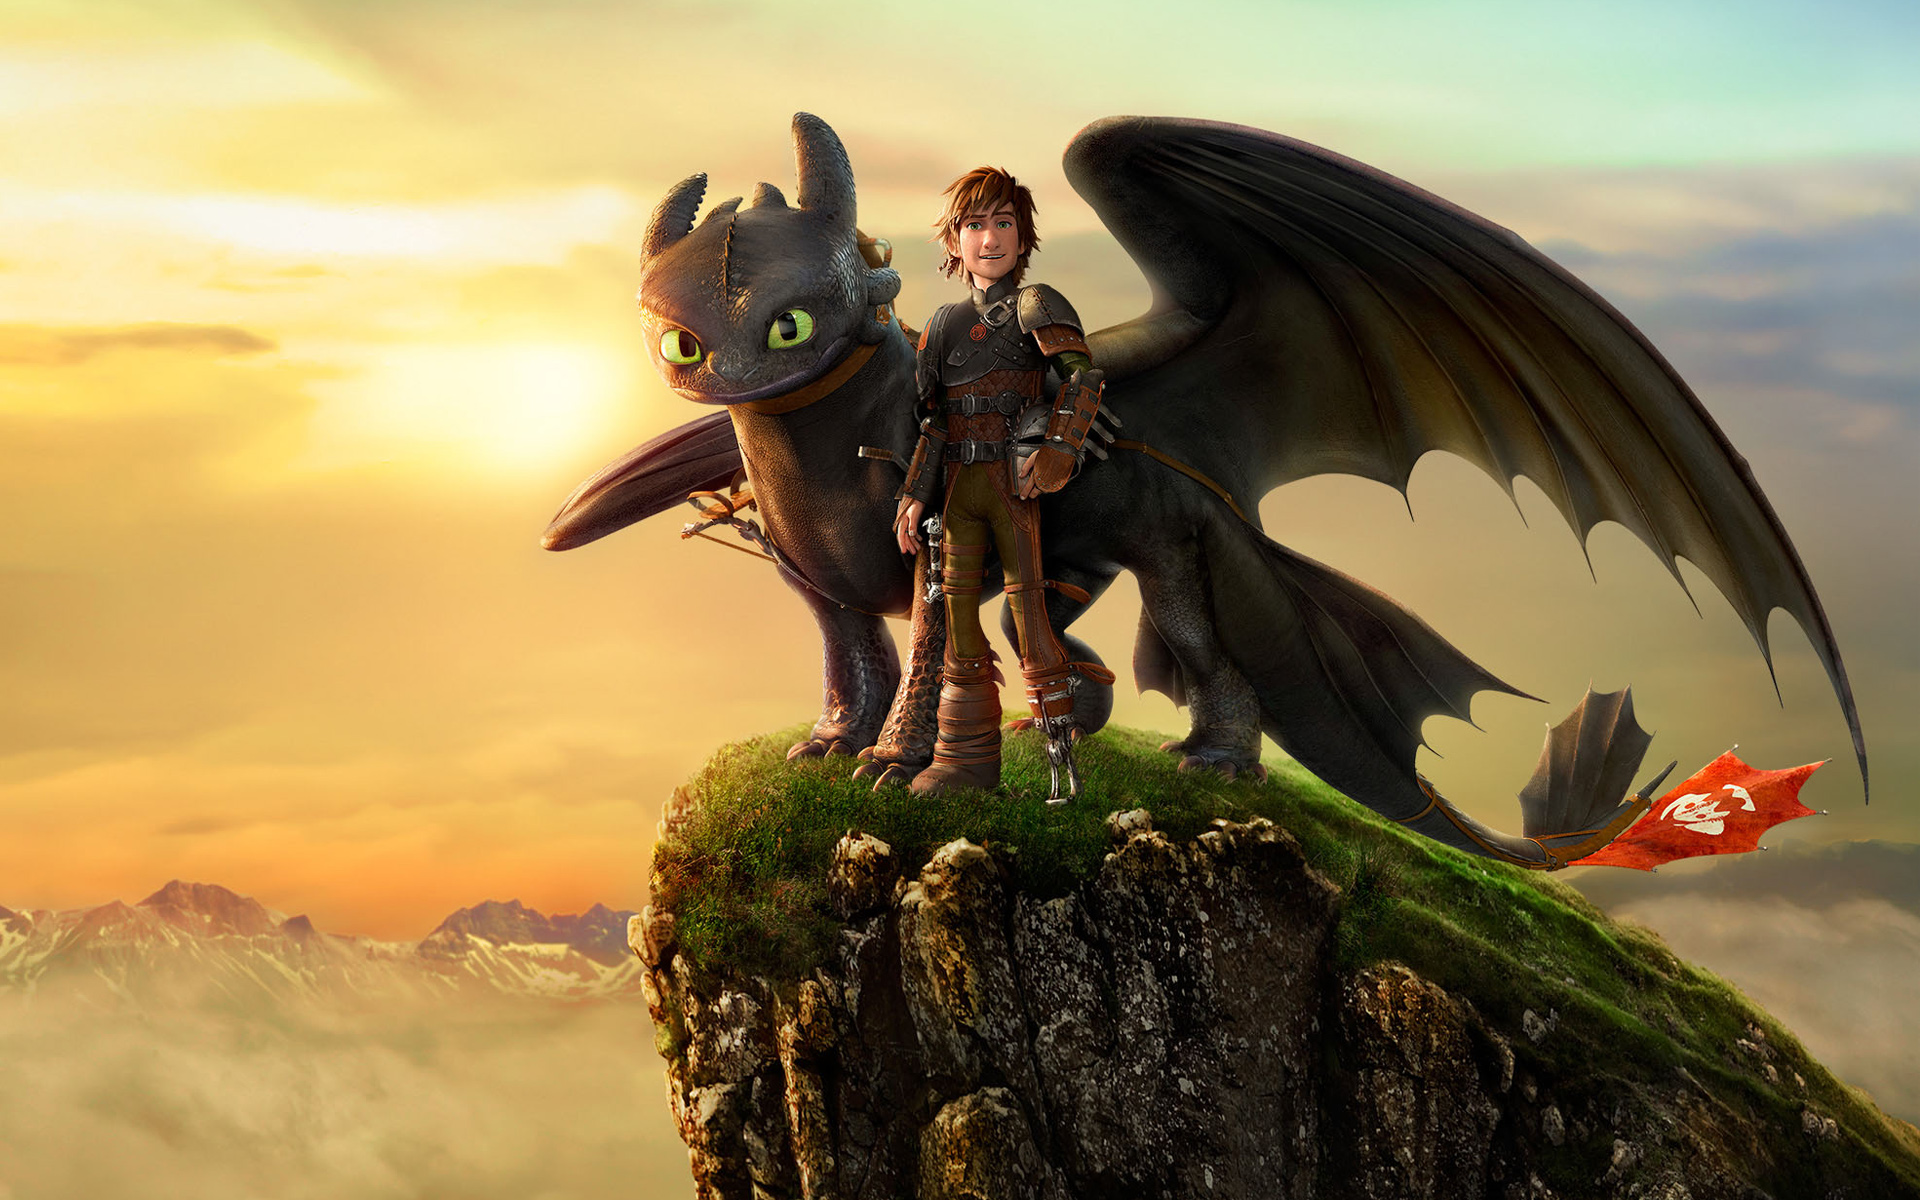 How To Train Your Dragon 2 #2